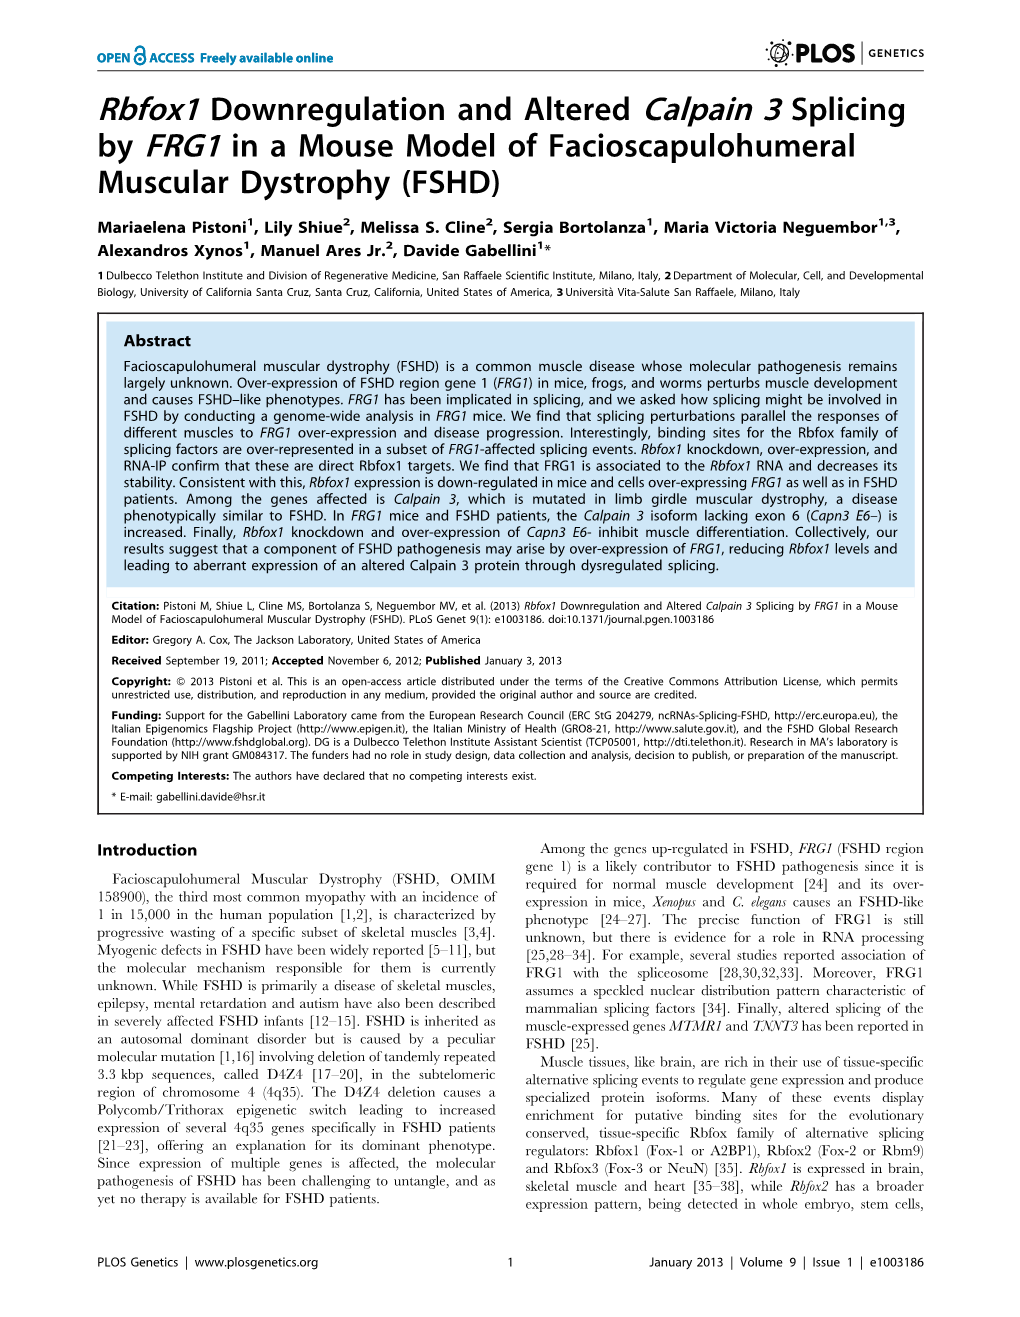 Rbfox1 Downregulation and Altered Calpain 3 Splicing by FRG1 in a Mouse Model of Facioscapulohumeral Muscular Dystrophy (FSHD)